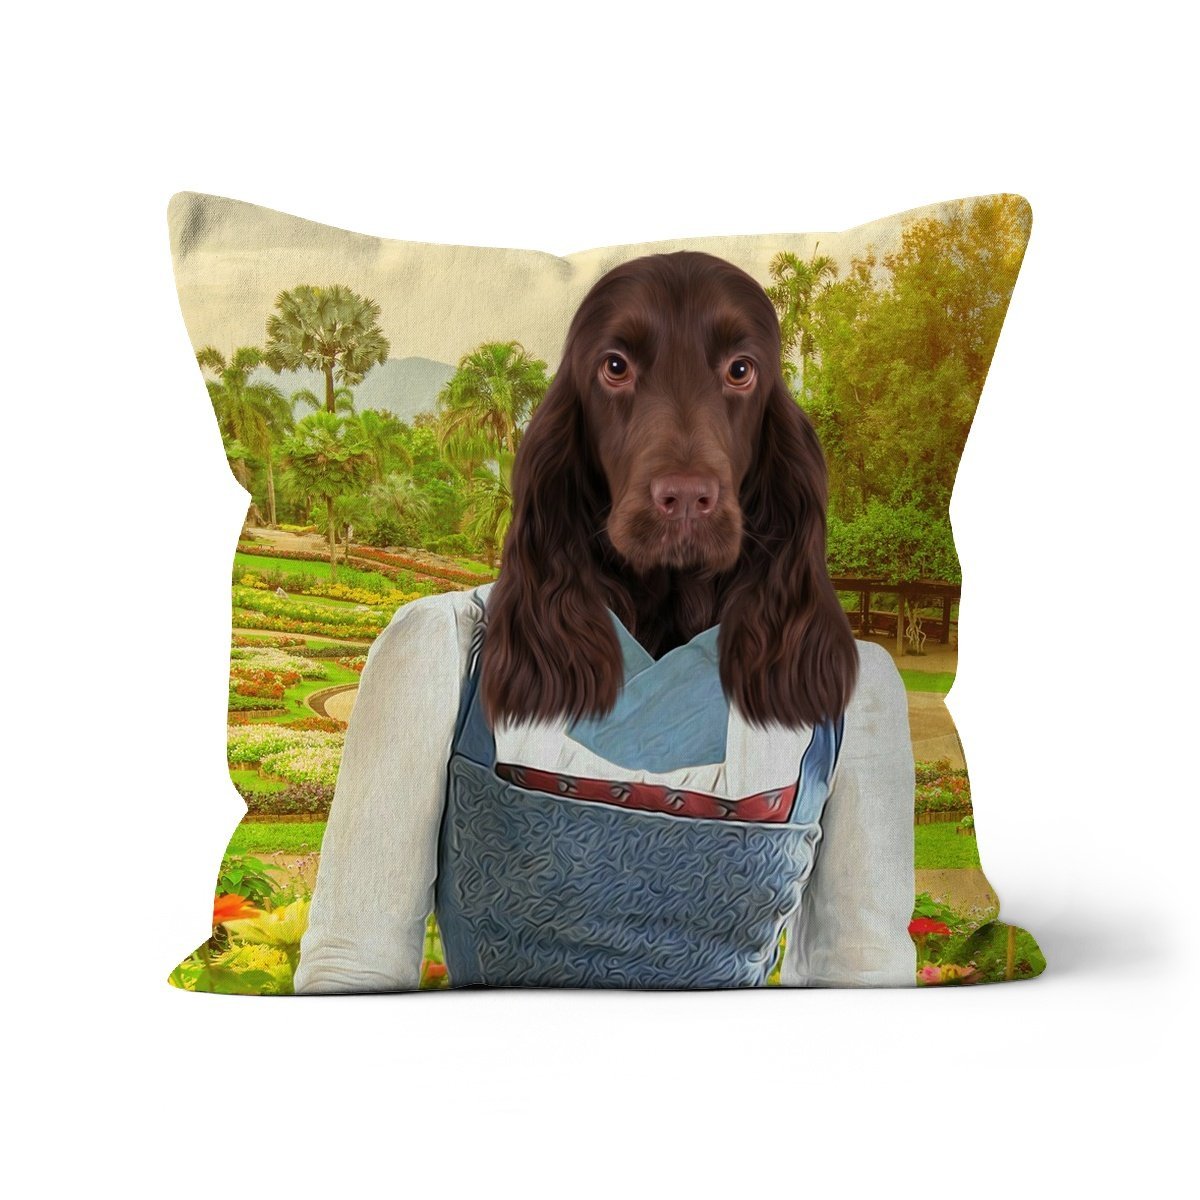 Belle (Beauty & The Beast Inspired): Custom Pet Cushion - Paw & Glory - #pet portraits# - #dog portraits# - #pet portraits uk#paw and glory, pet portraits cushion,pet face pillows, personalised pet pillows, pillows with dogs picture, custom pet pillows, pet print pillow